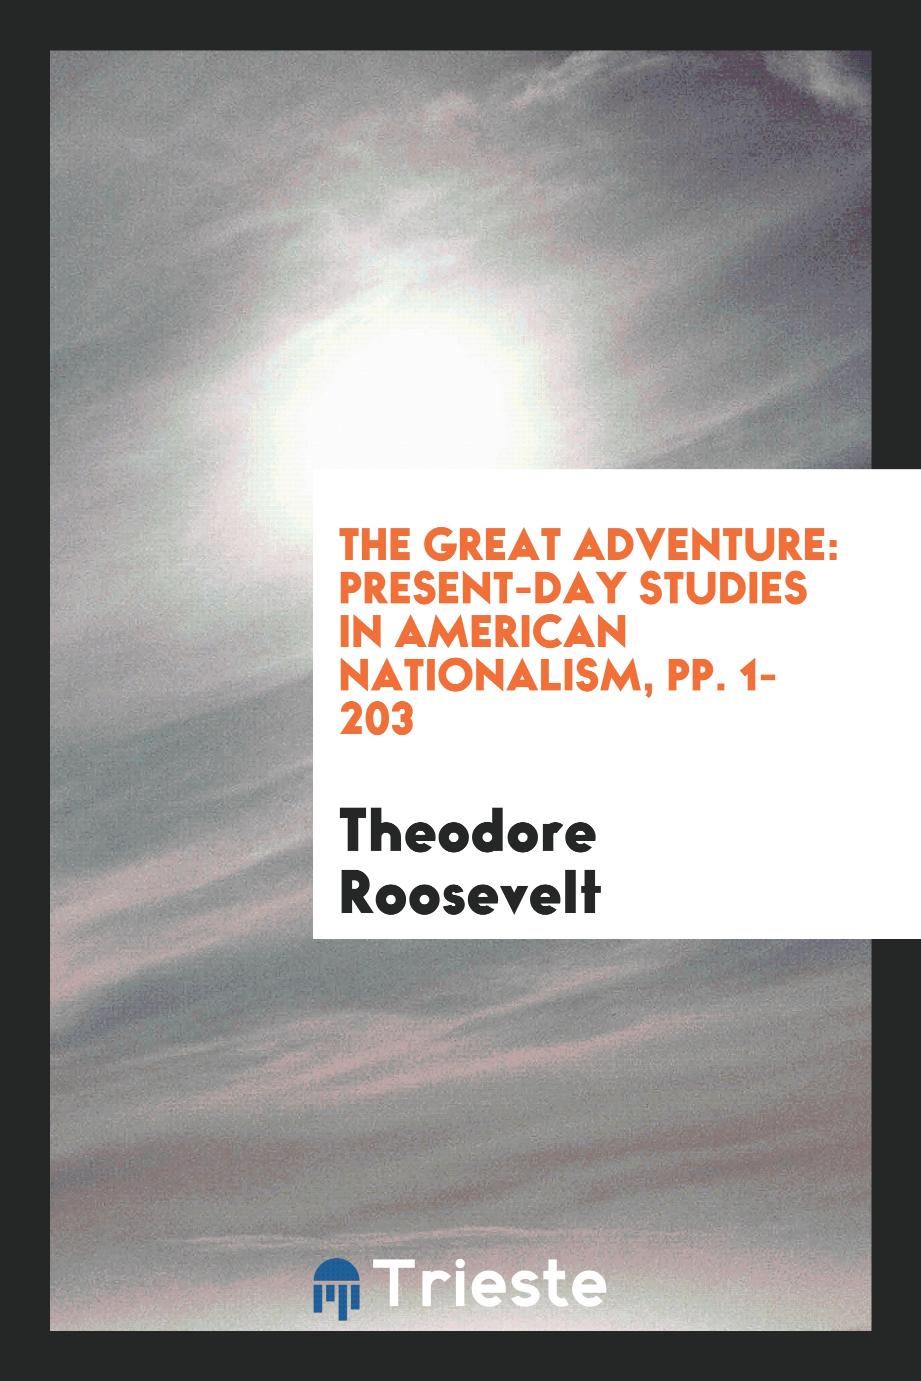 The Great Adventure: Present-Day Studies in American Nationalism, pp. 1-203